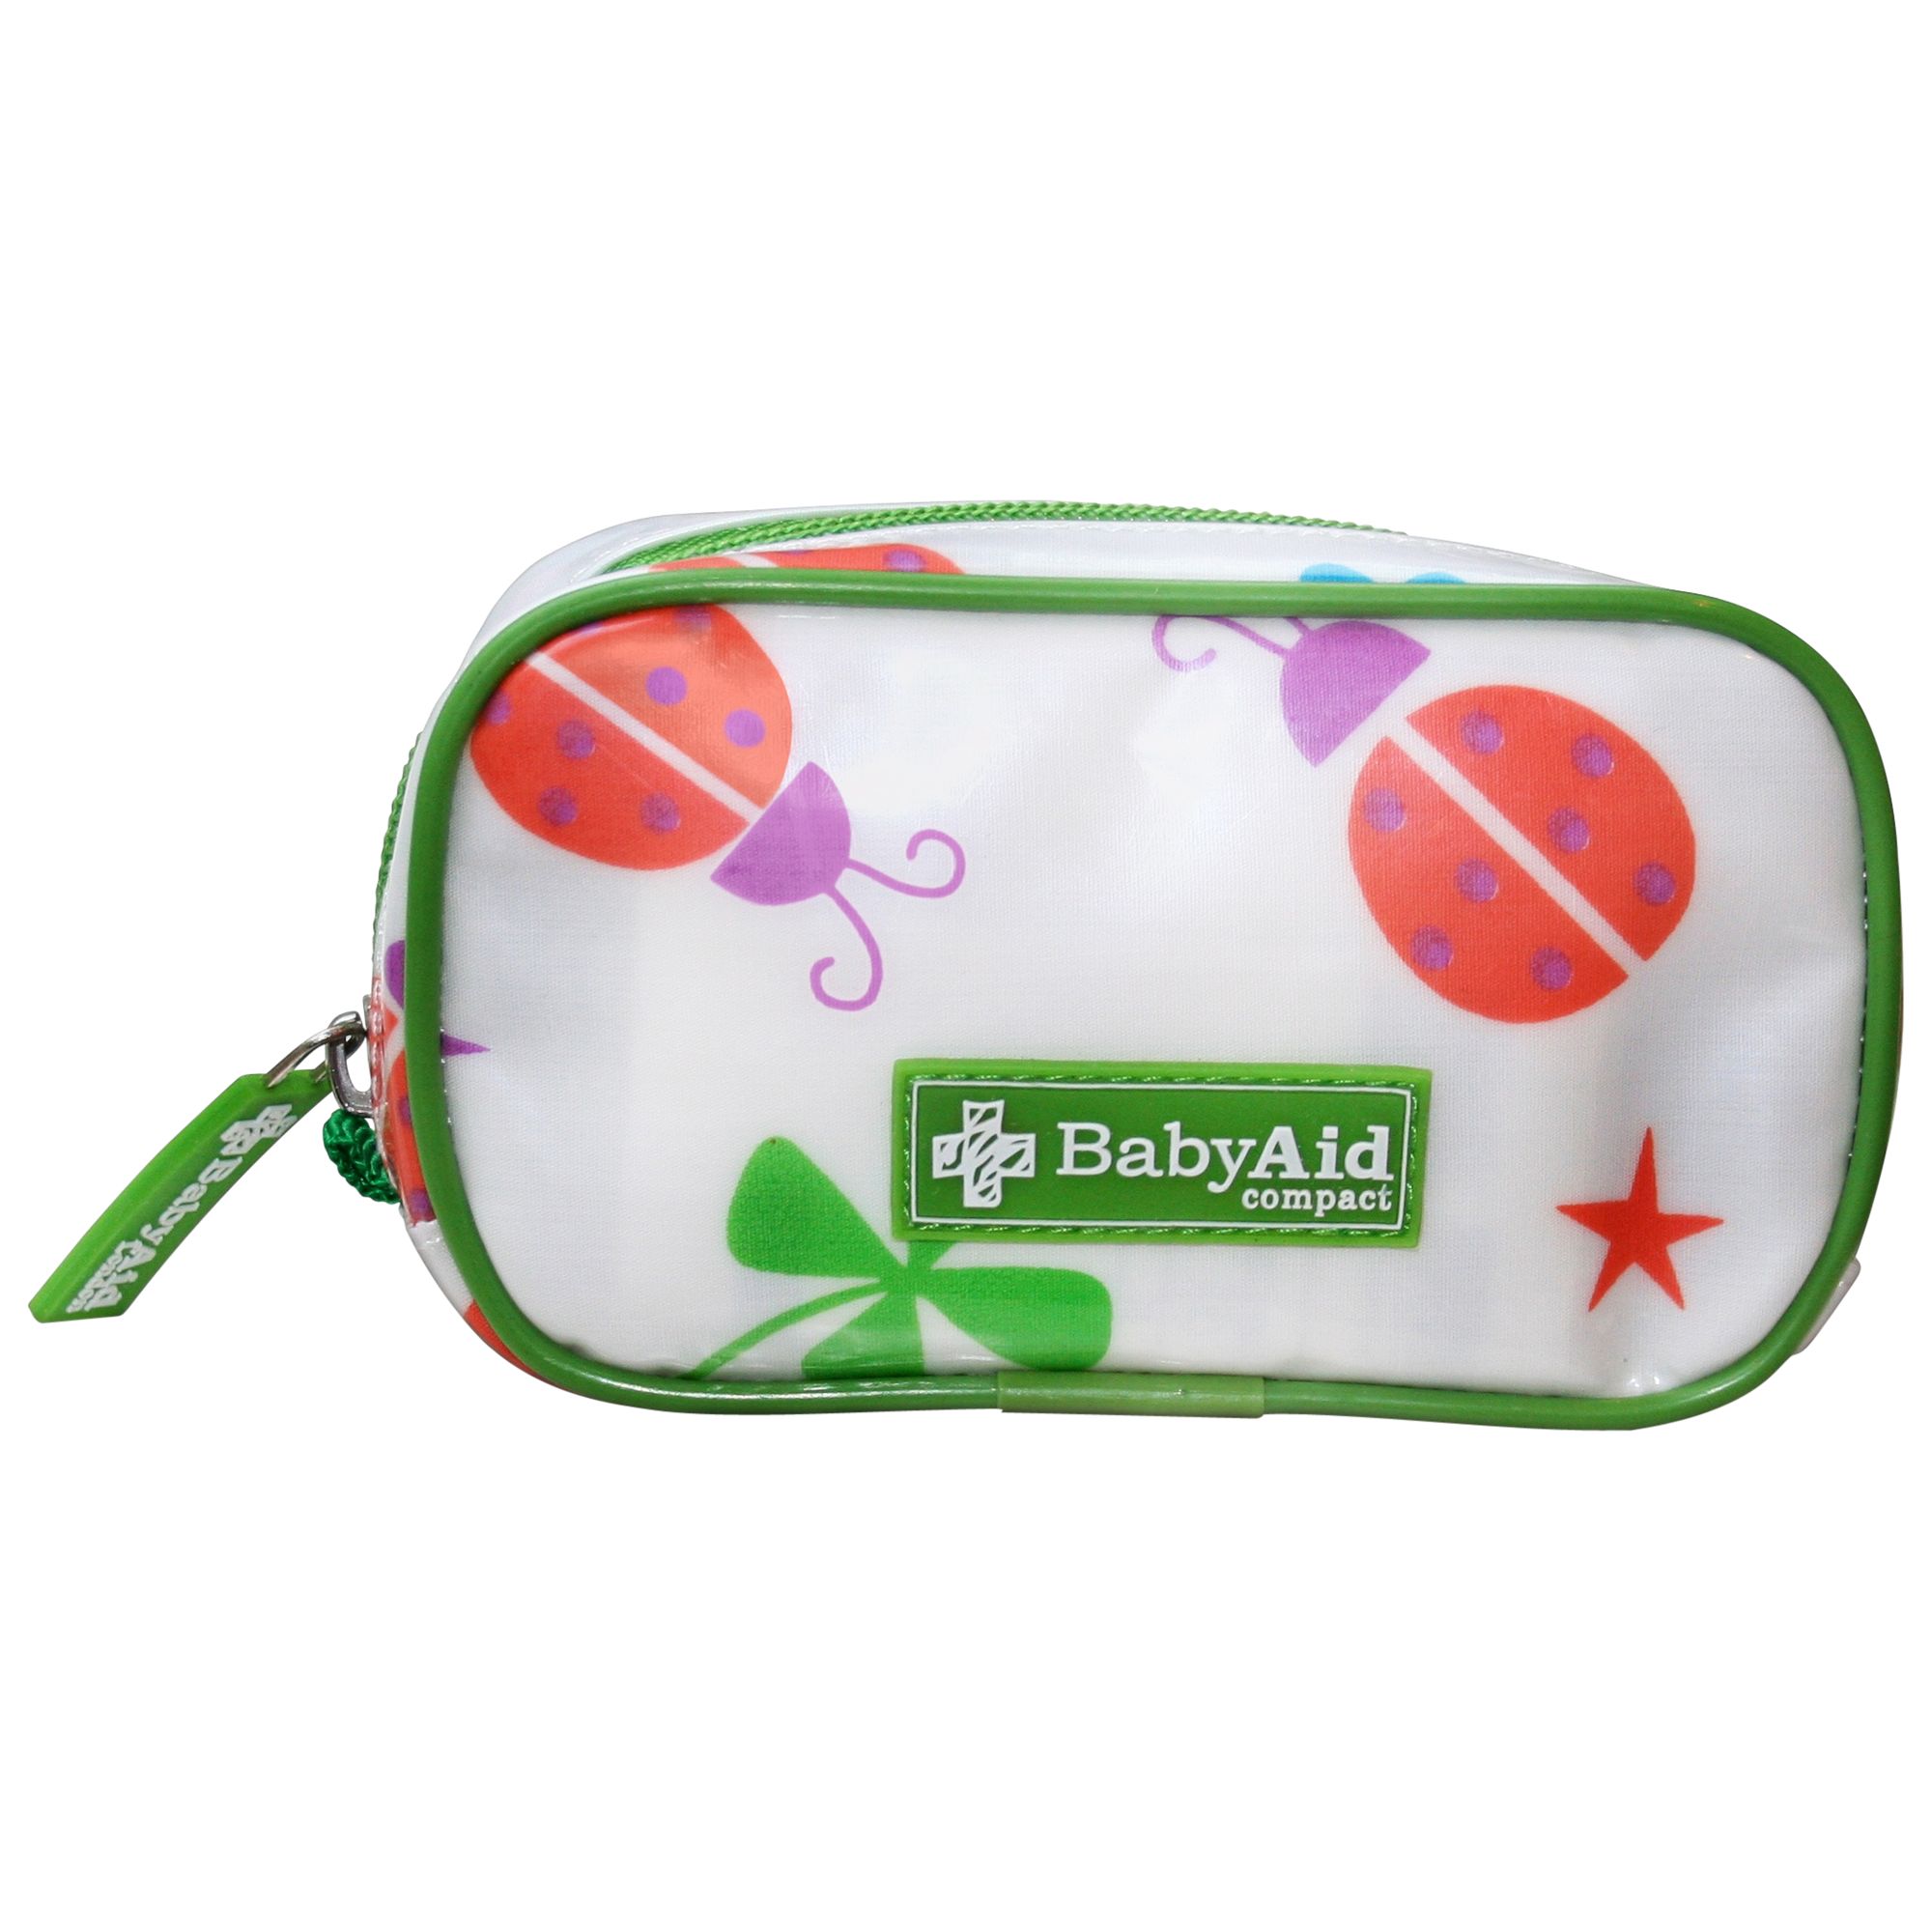 John Lewis Baby Aid Compact First Aid Kit